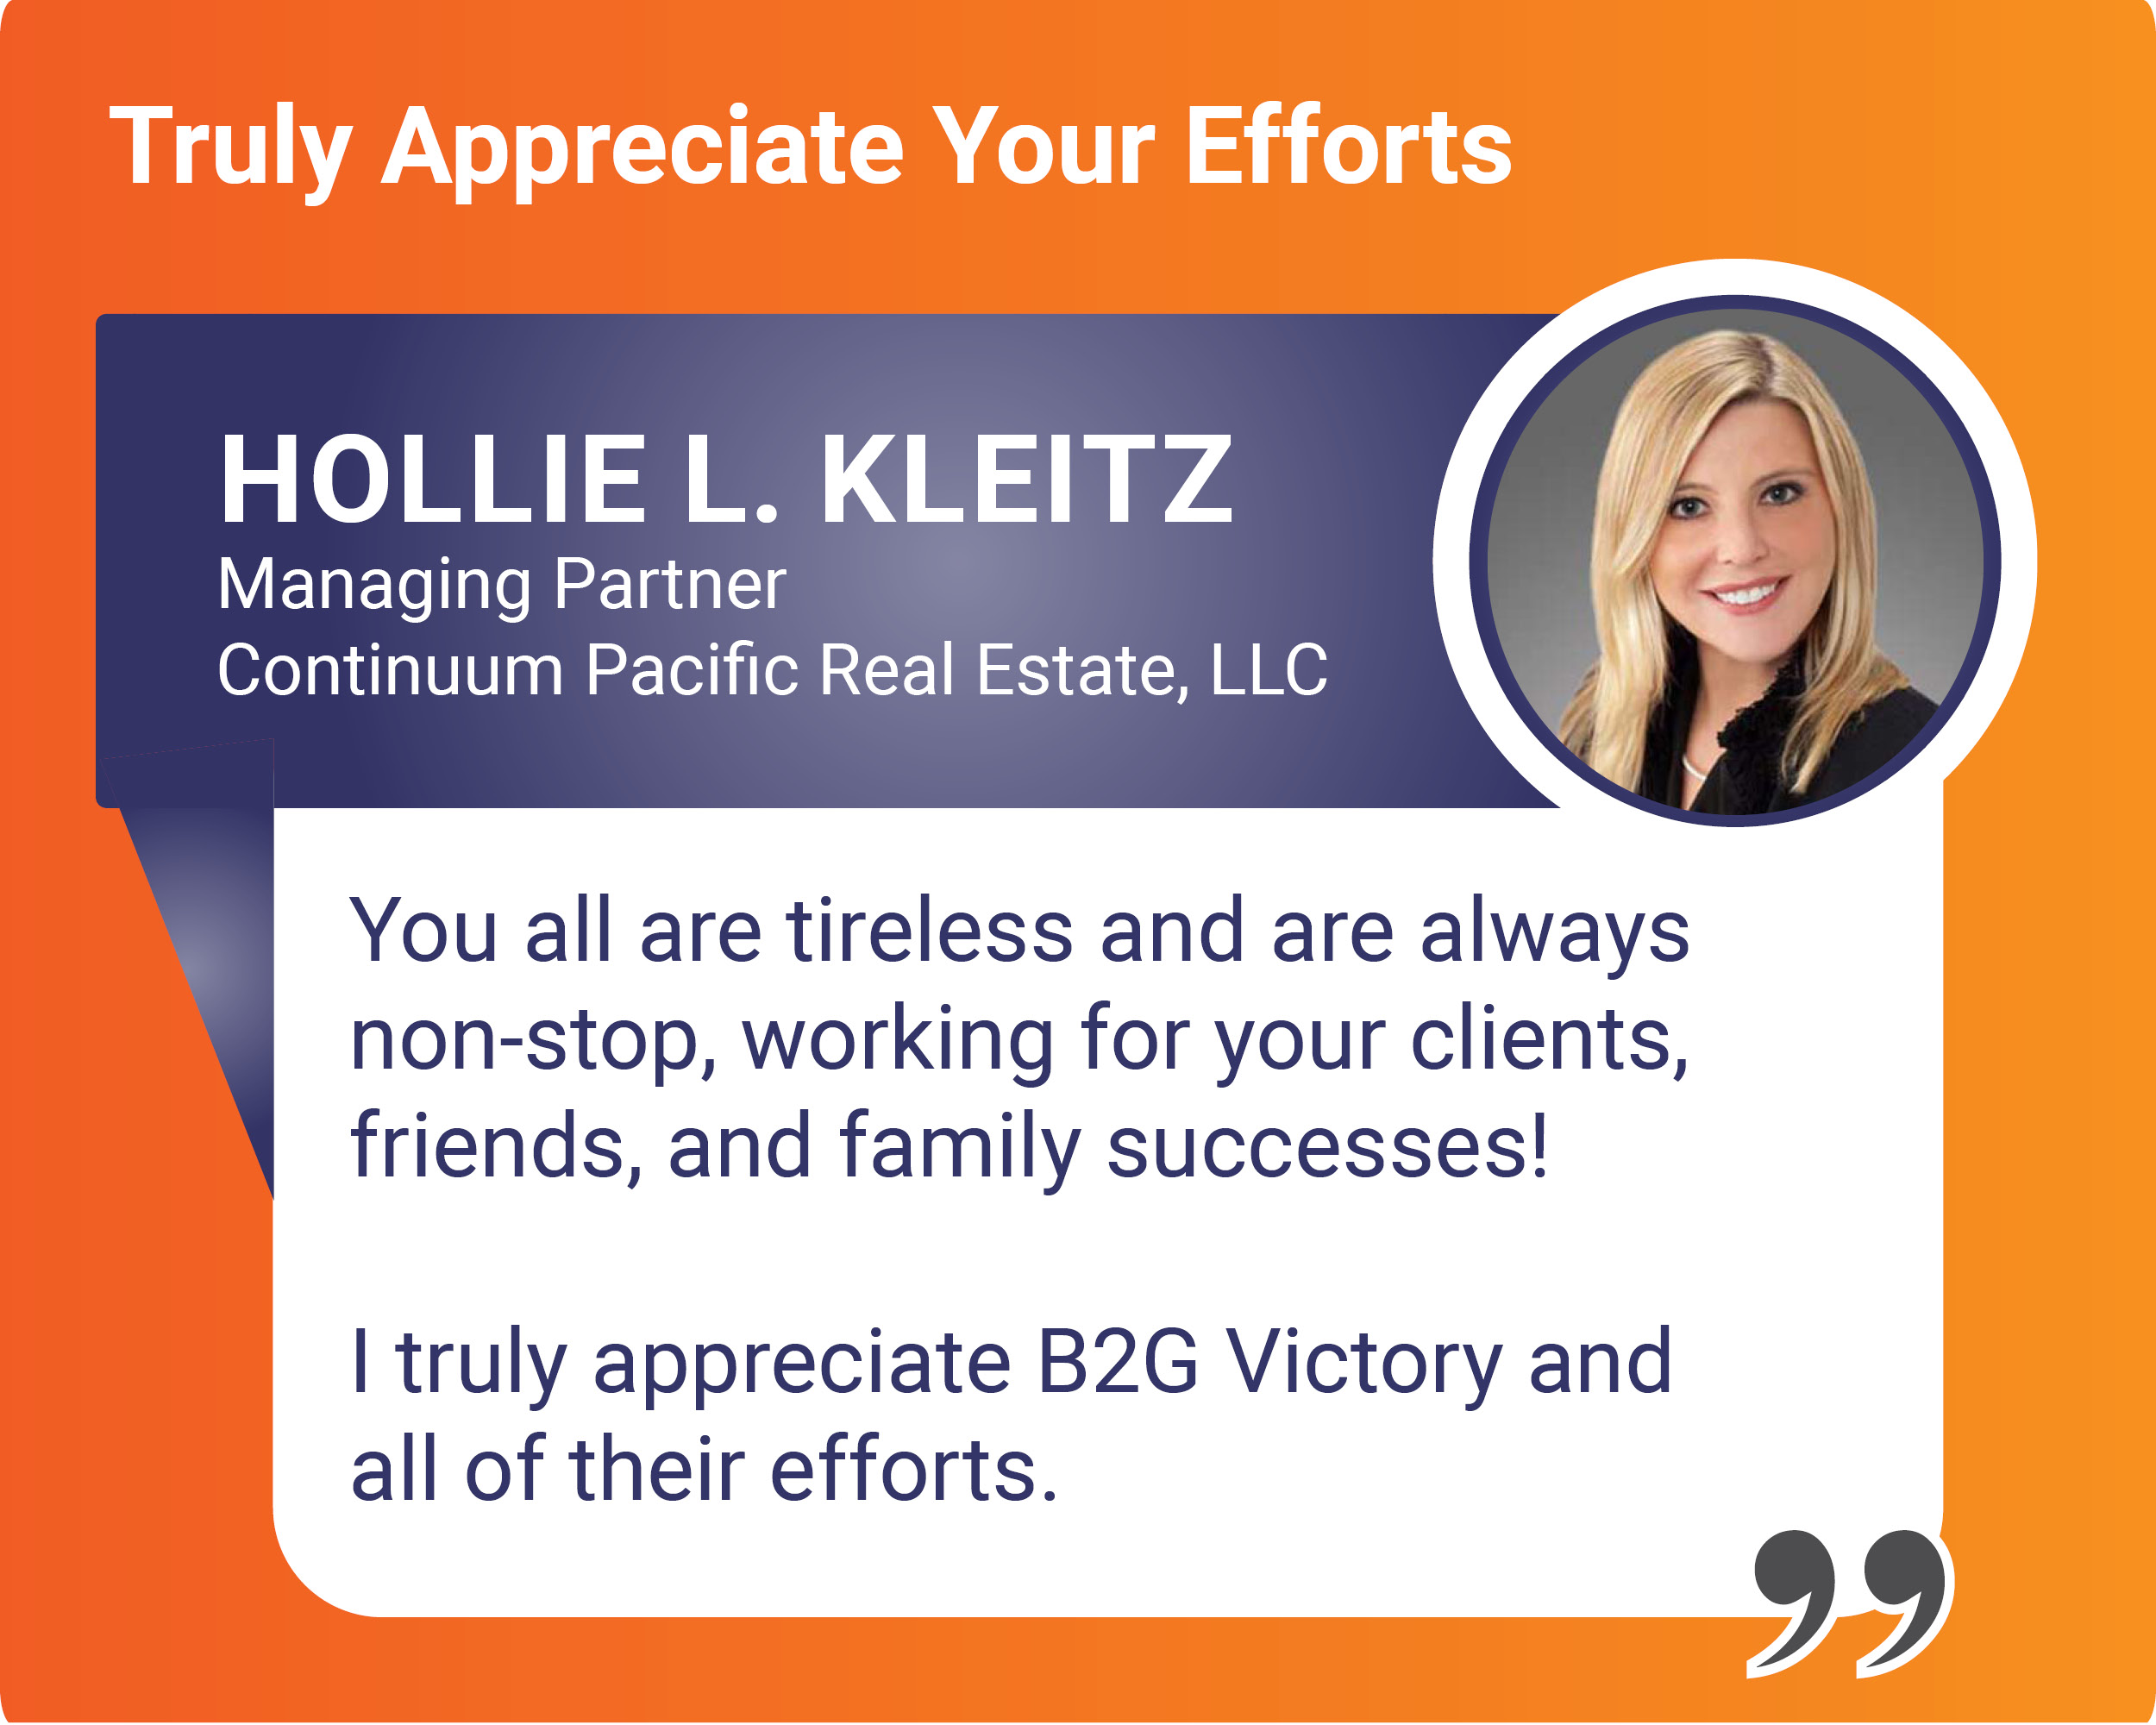 Testimonial from Hollie L. Kleitz from Continuum Pacific Real Estate, LLC